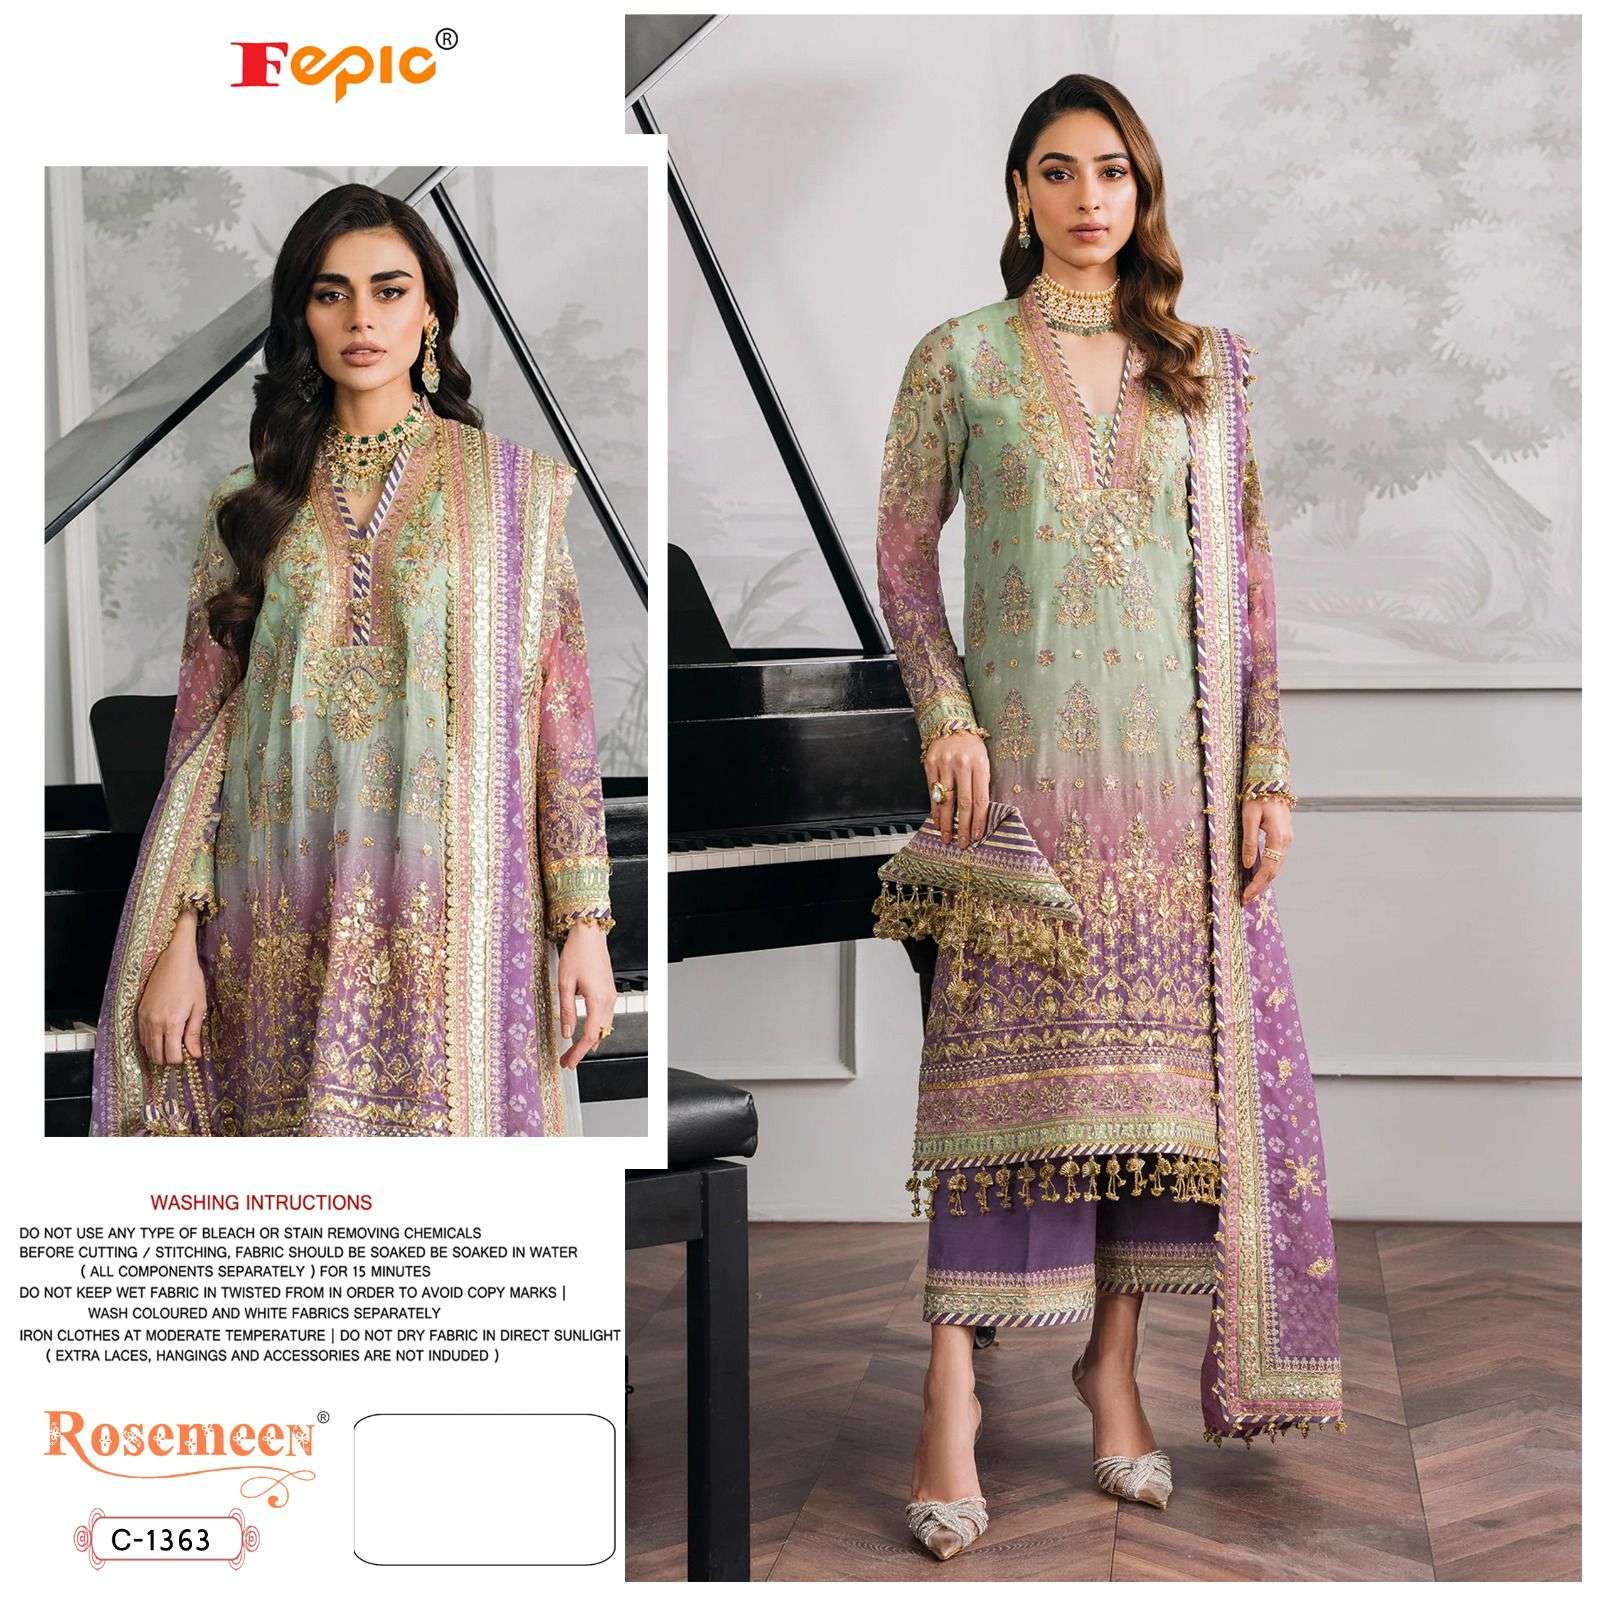 ROSEMEEN C-1363 BY FEPIC DESIGNER GEORGETTE EMBROIDERY DRESSES